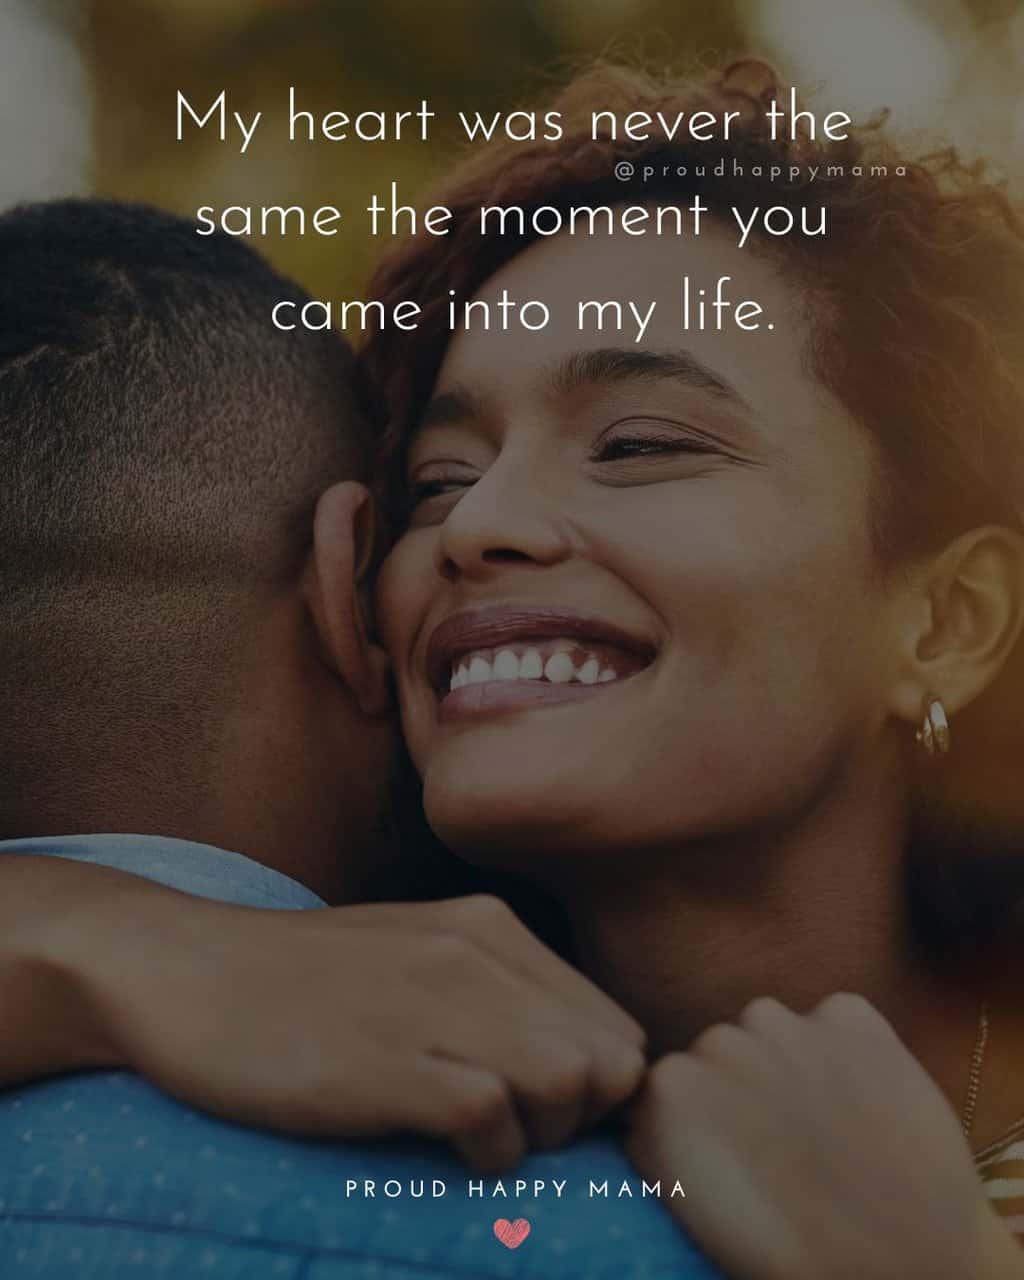 Smiling women hugging boyfriend with love words for her text overlay. ‘My heart was never the same the moment you came into my life.’